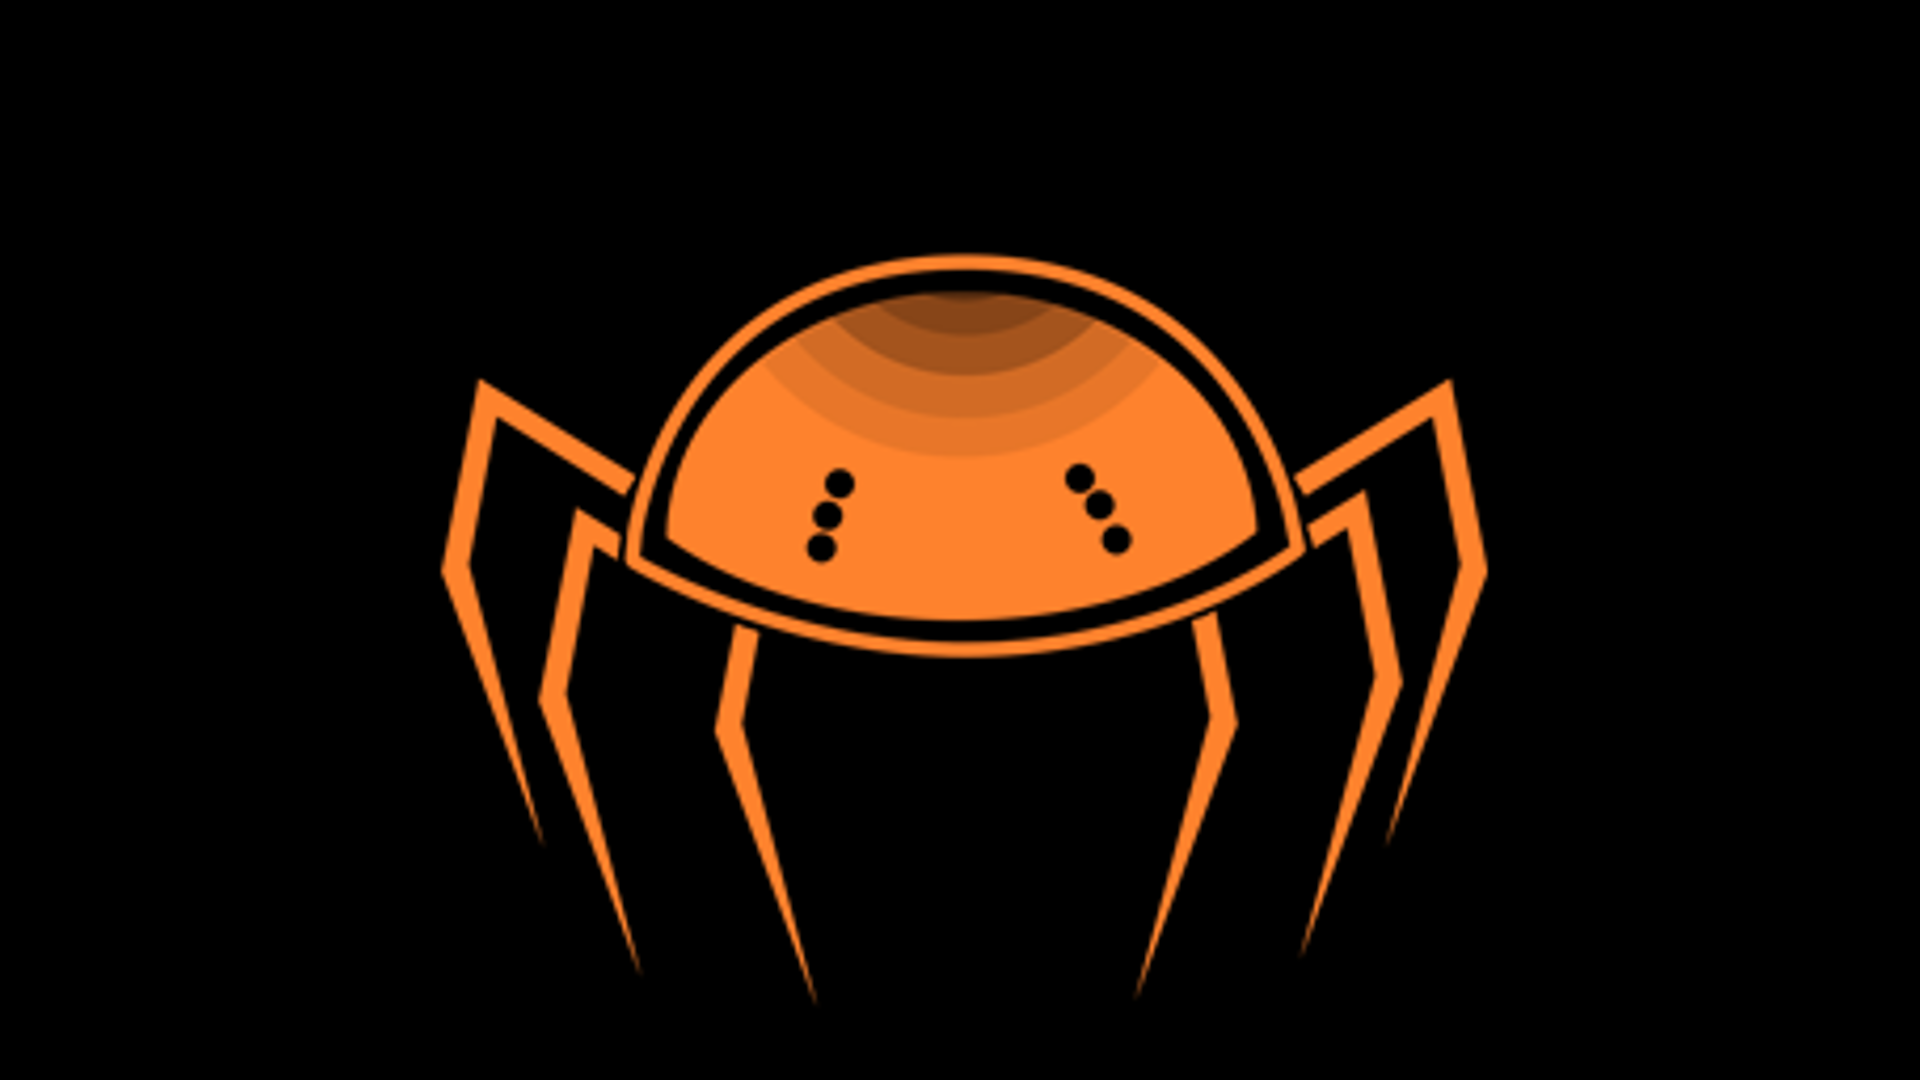 Icon for Untangle the Web